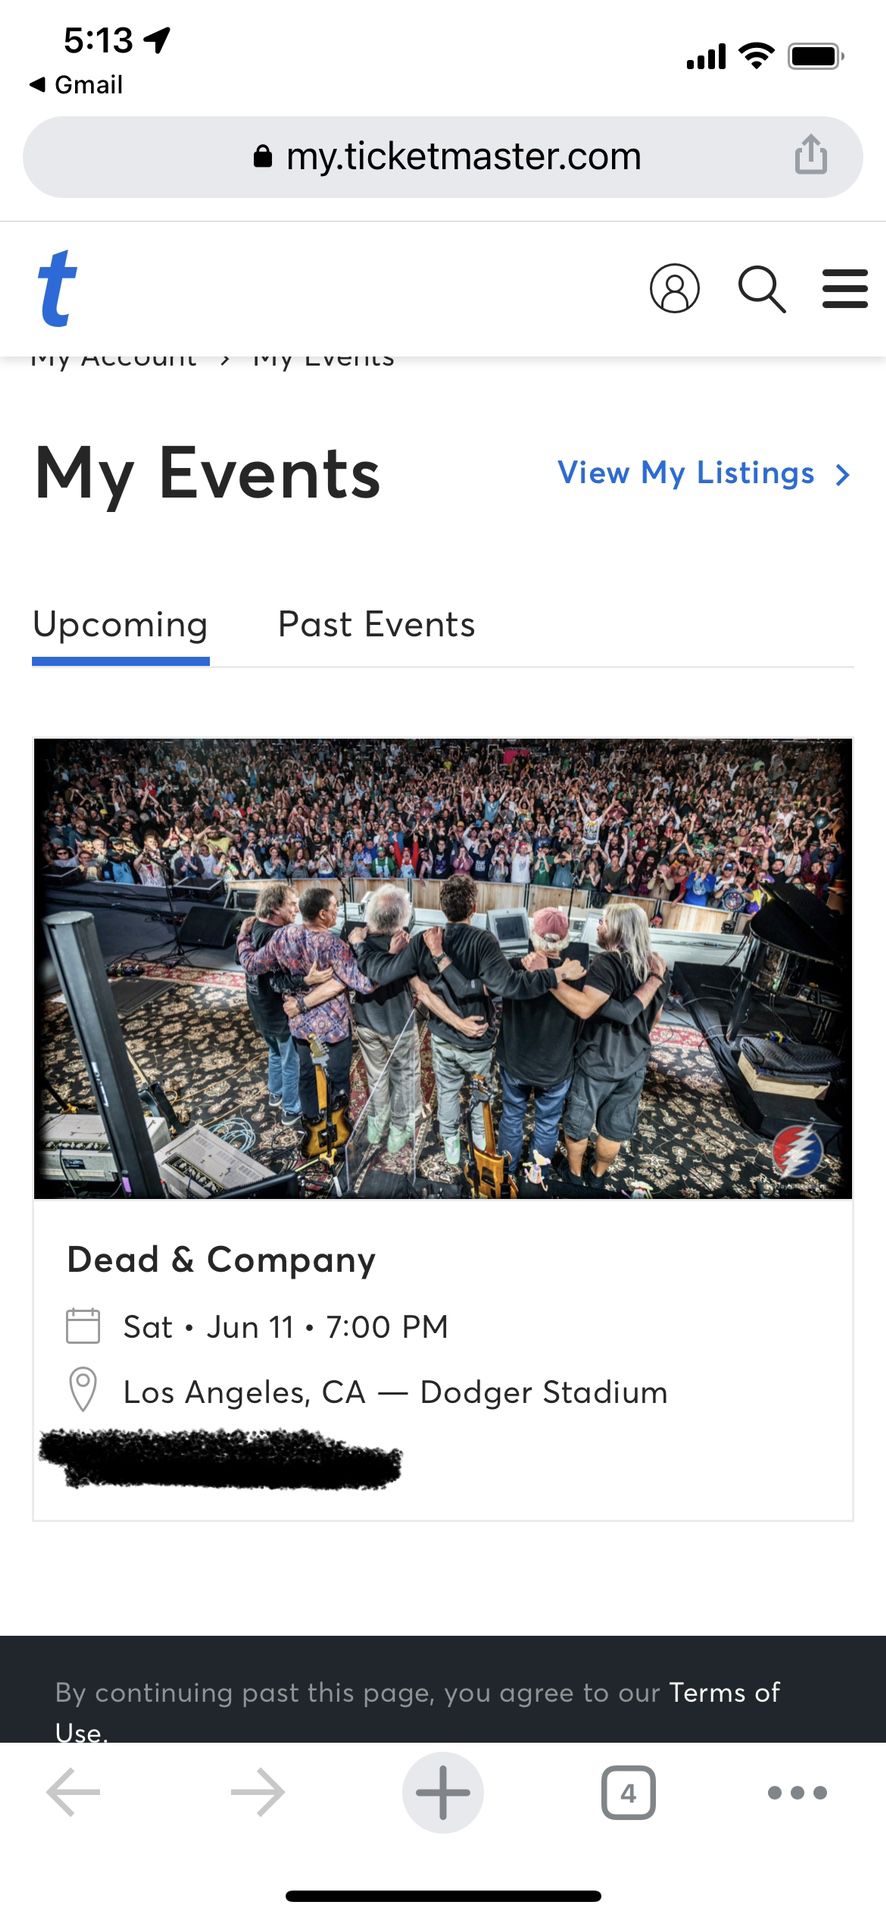 4 Tickets for Dead & Company